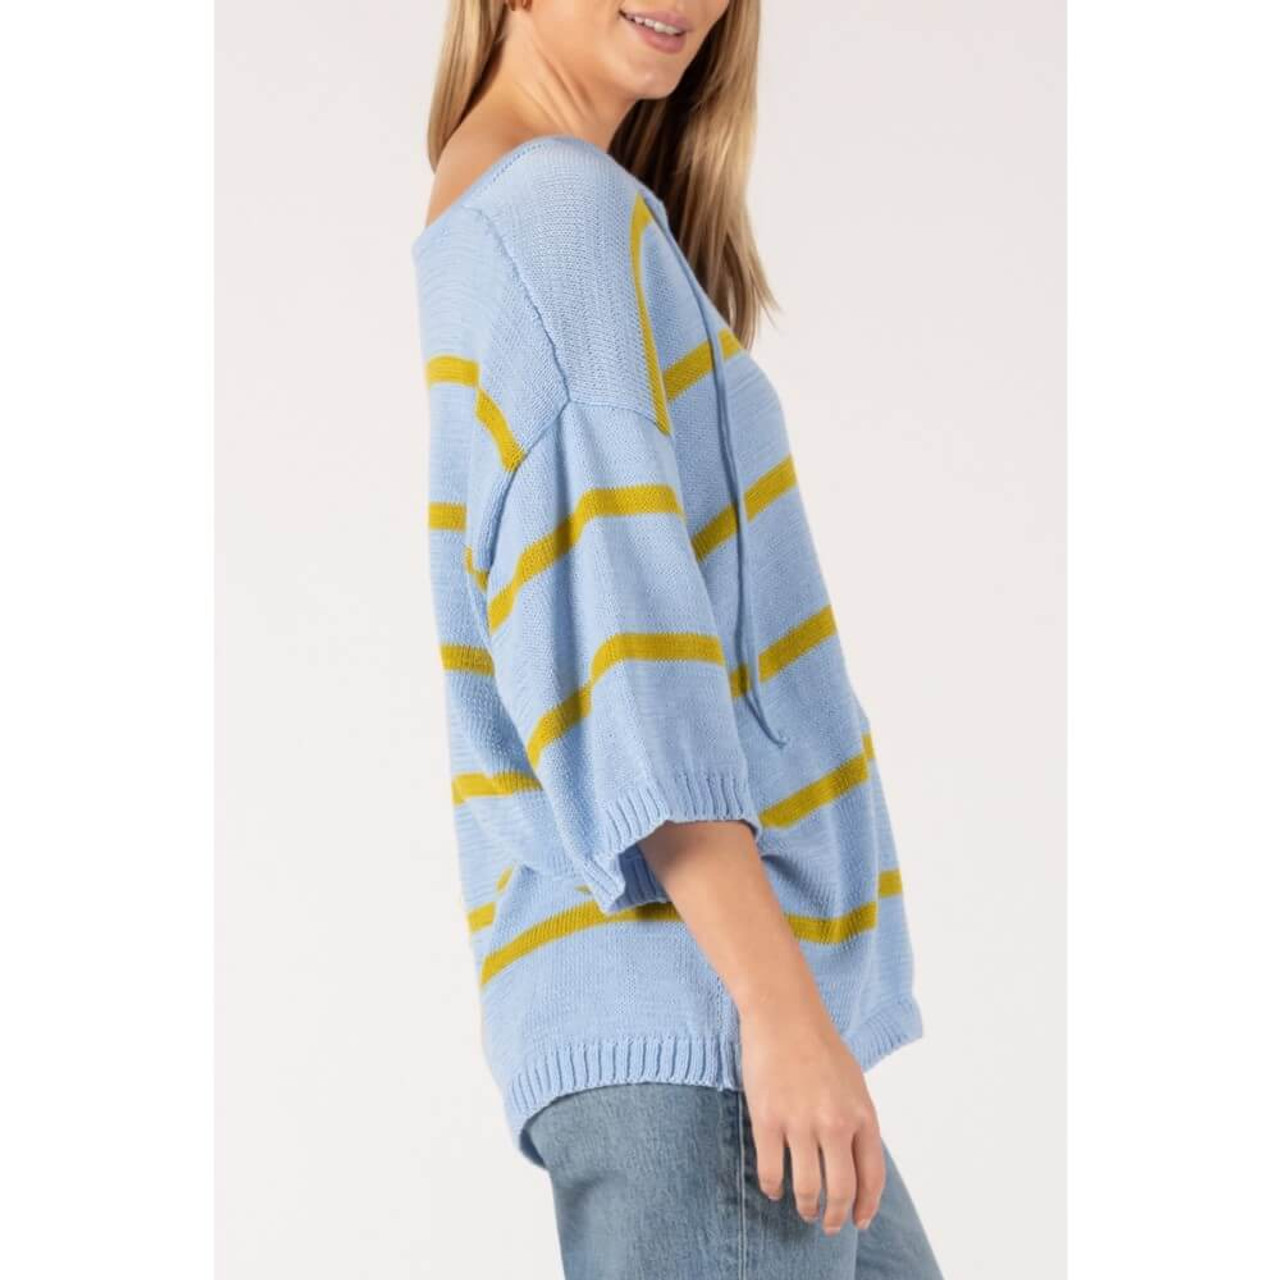 Before You Striped V-Neck 3/4 Sleeve Sweater Blue Green